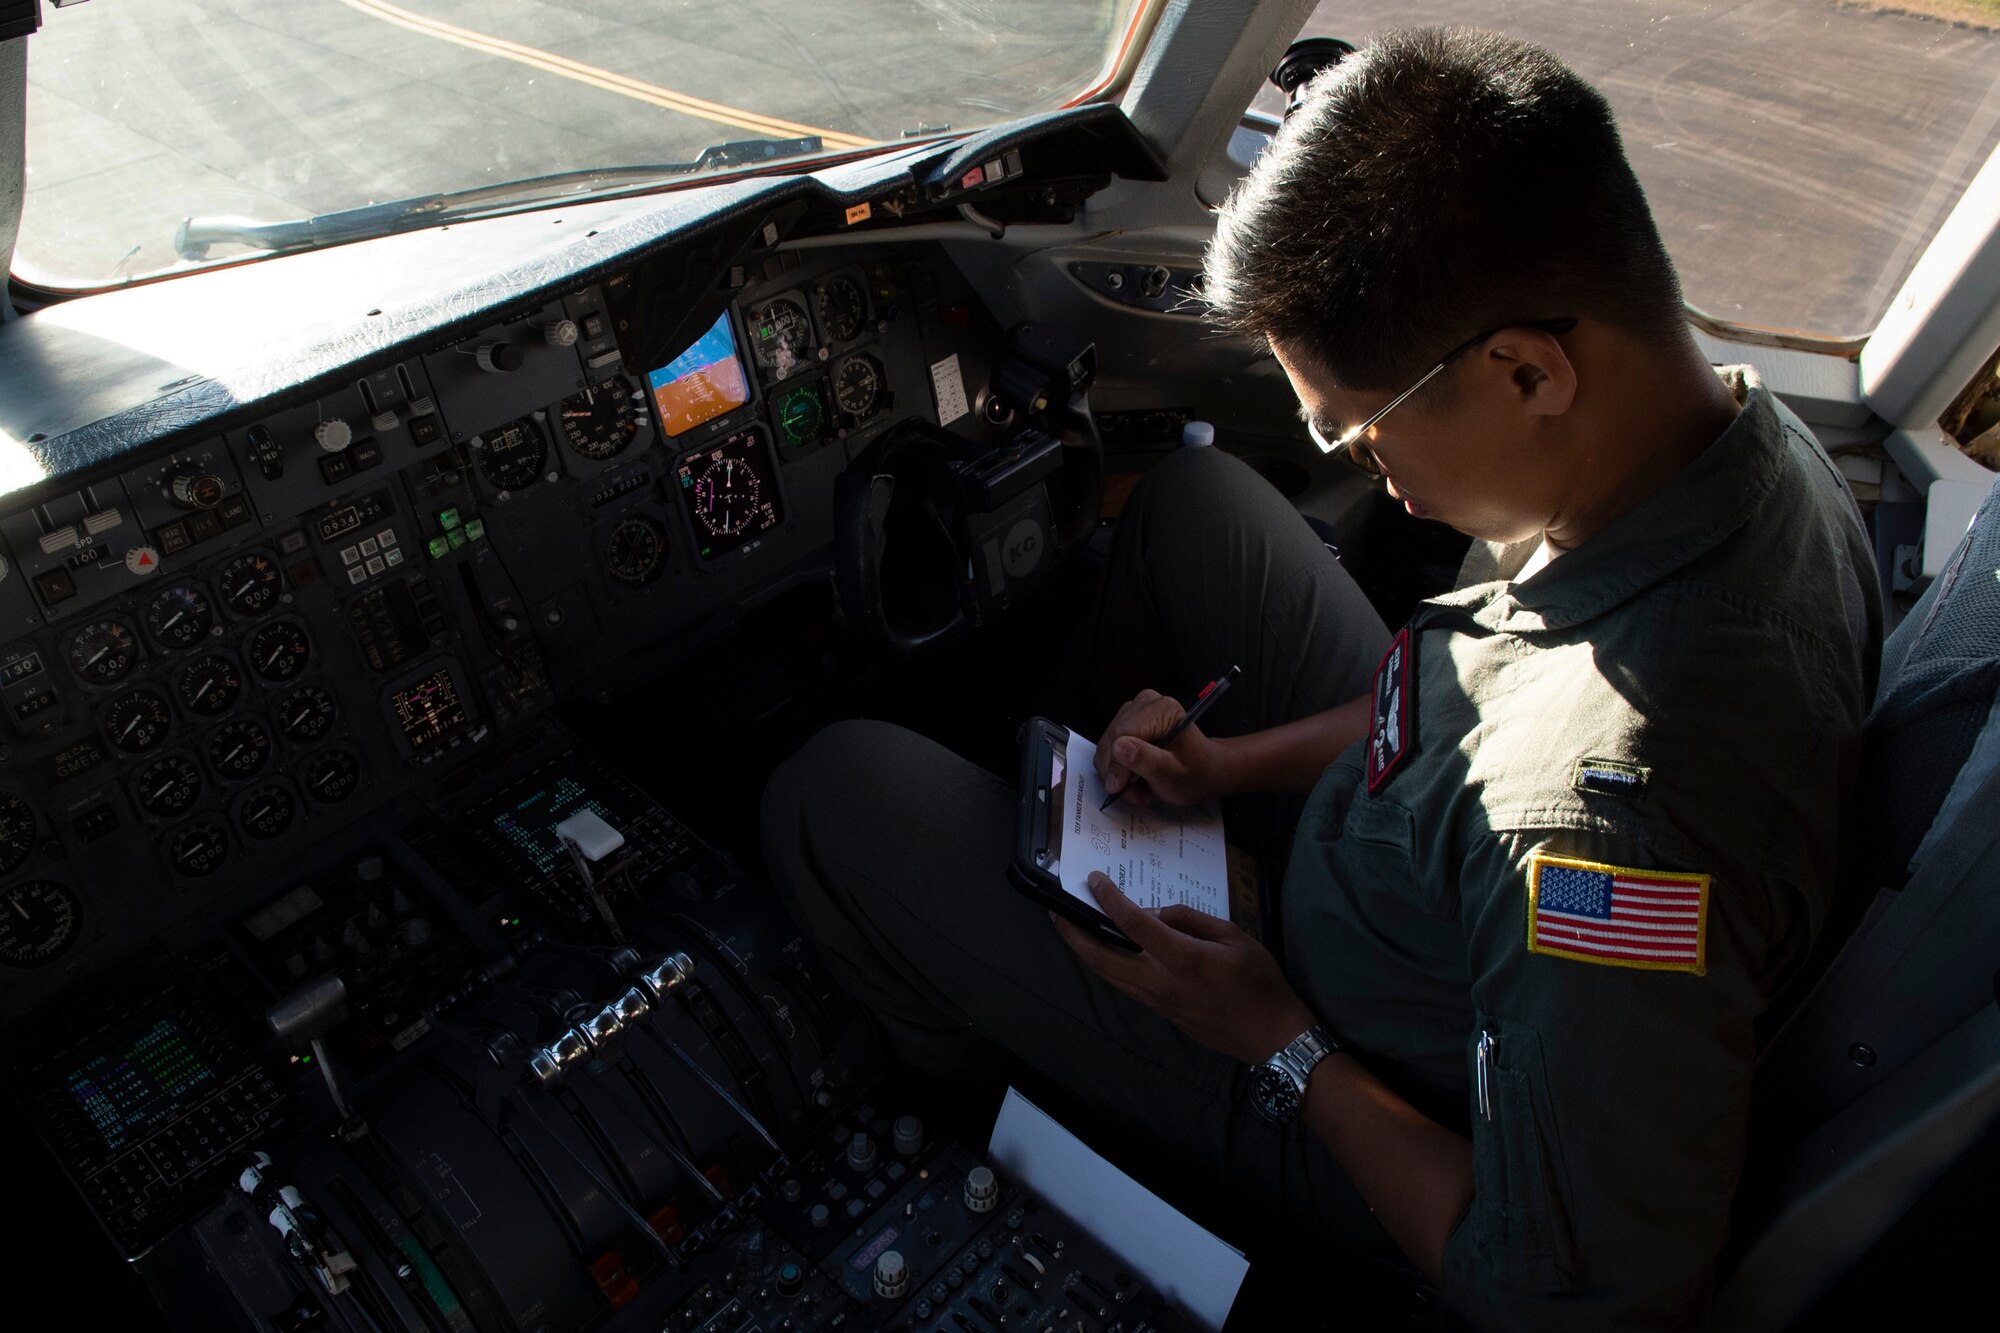 A U.S. Air Force KC-10 Extender pilot performs preflight checks aboard an Extender July 16, before departing from Brisbane International Airport, Australia, in support of Exercise Talisman Sabre 19. The Extender arrived July 12 to support major air operations for USAF, Royal Australian Air Force and U.S. Navy aircraft operating out of RAAF Base Amberley for TS19. (U.S. Air Force photo by Senior Airman Elora J. Martinez)